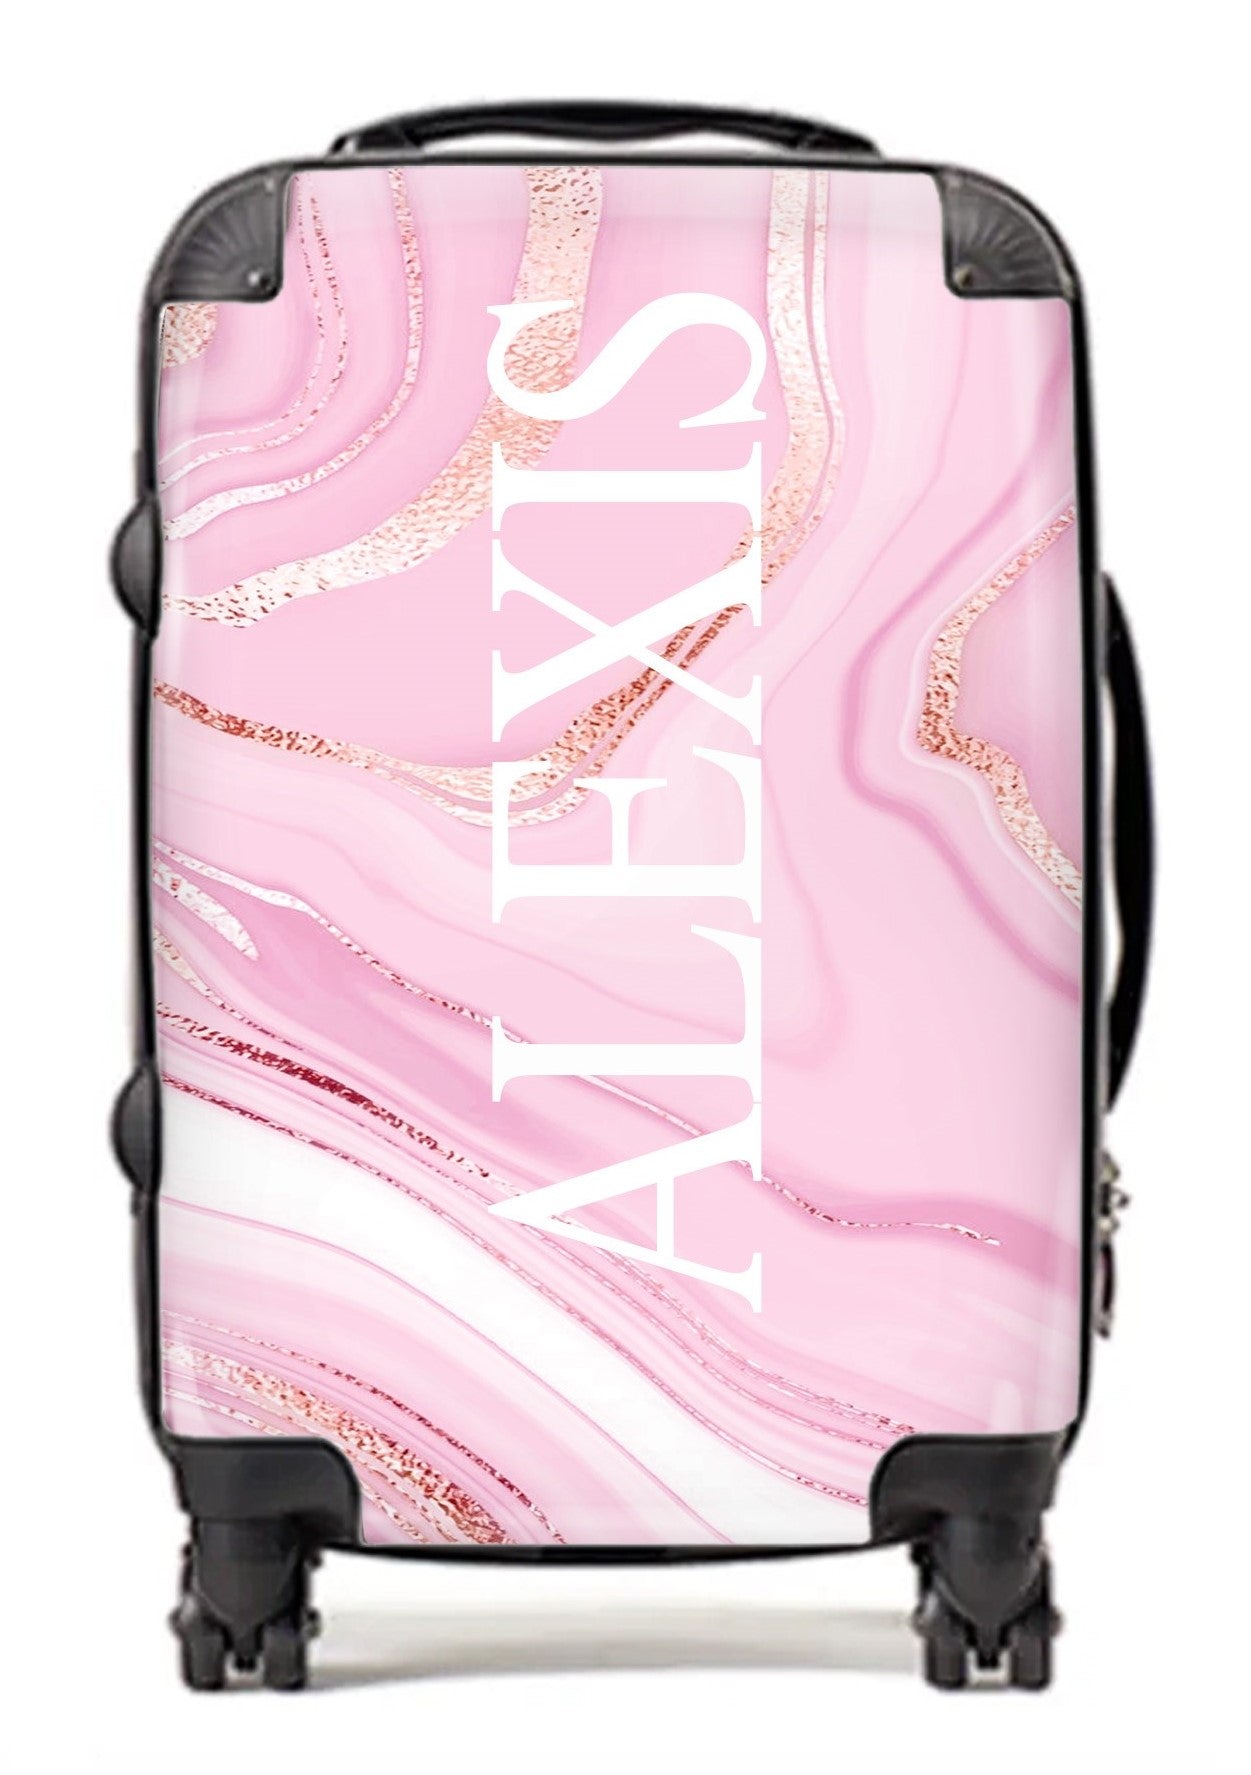 PERSONALIZED PINK AND ROSE GOLD NAME LUGGAGE